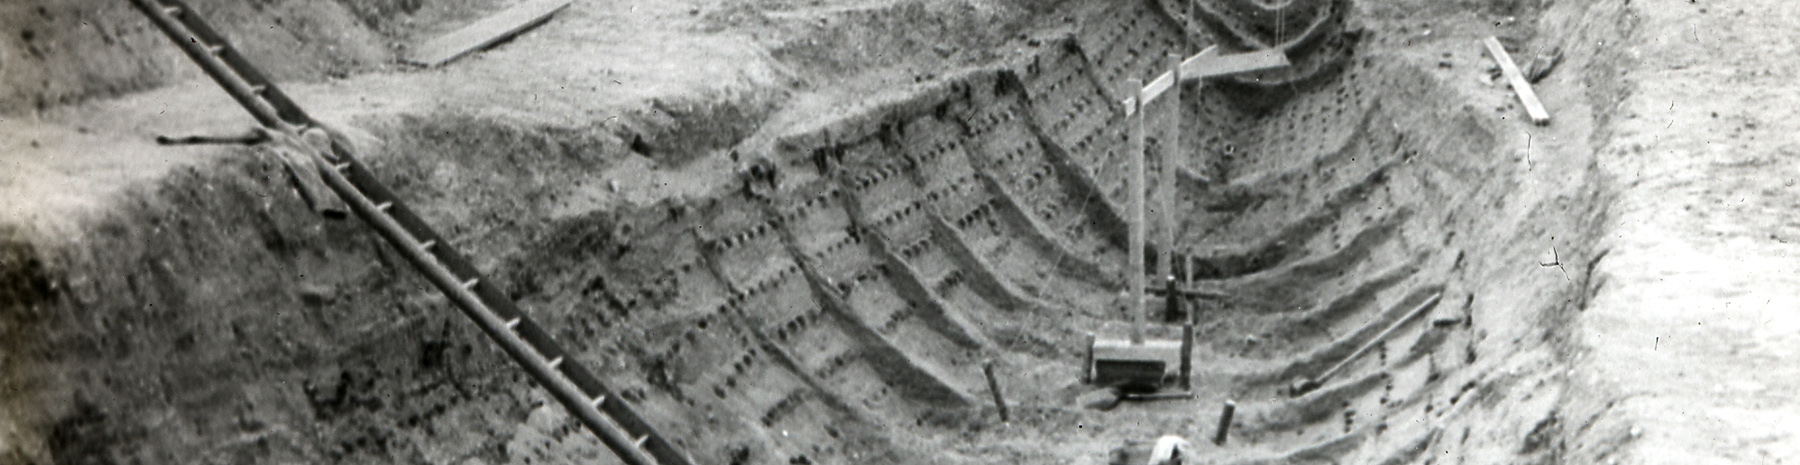 black and white photo of the Sutton Hoo ship burial excavation